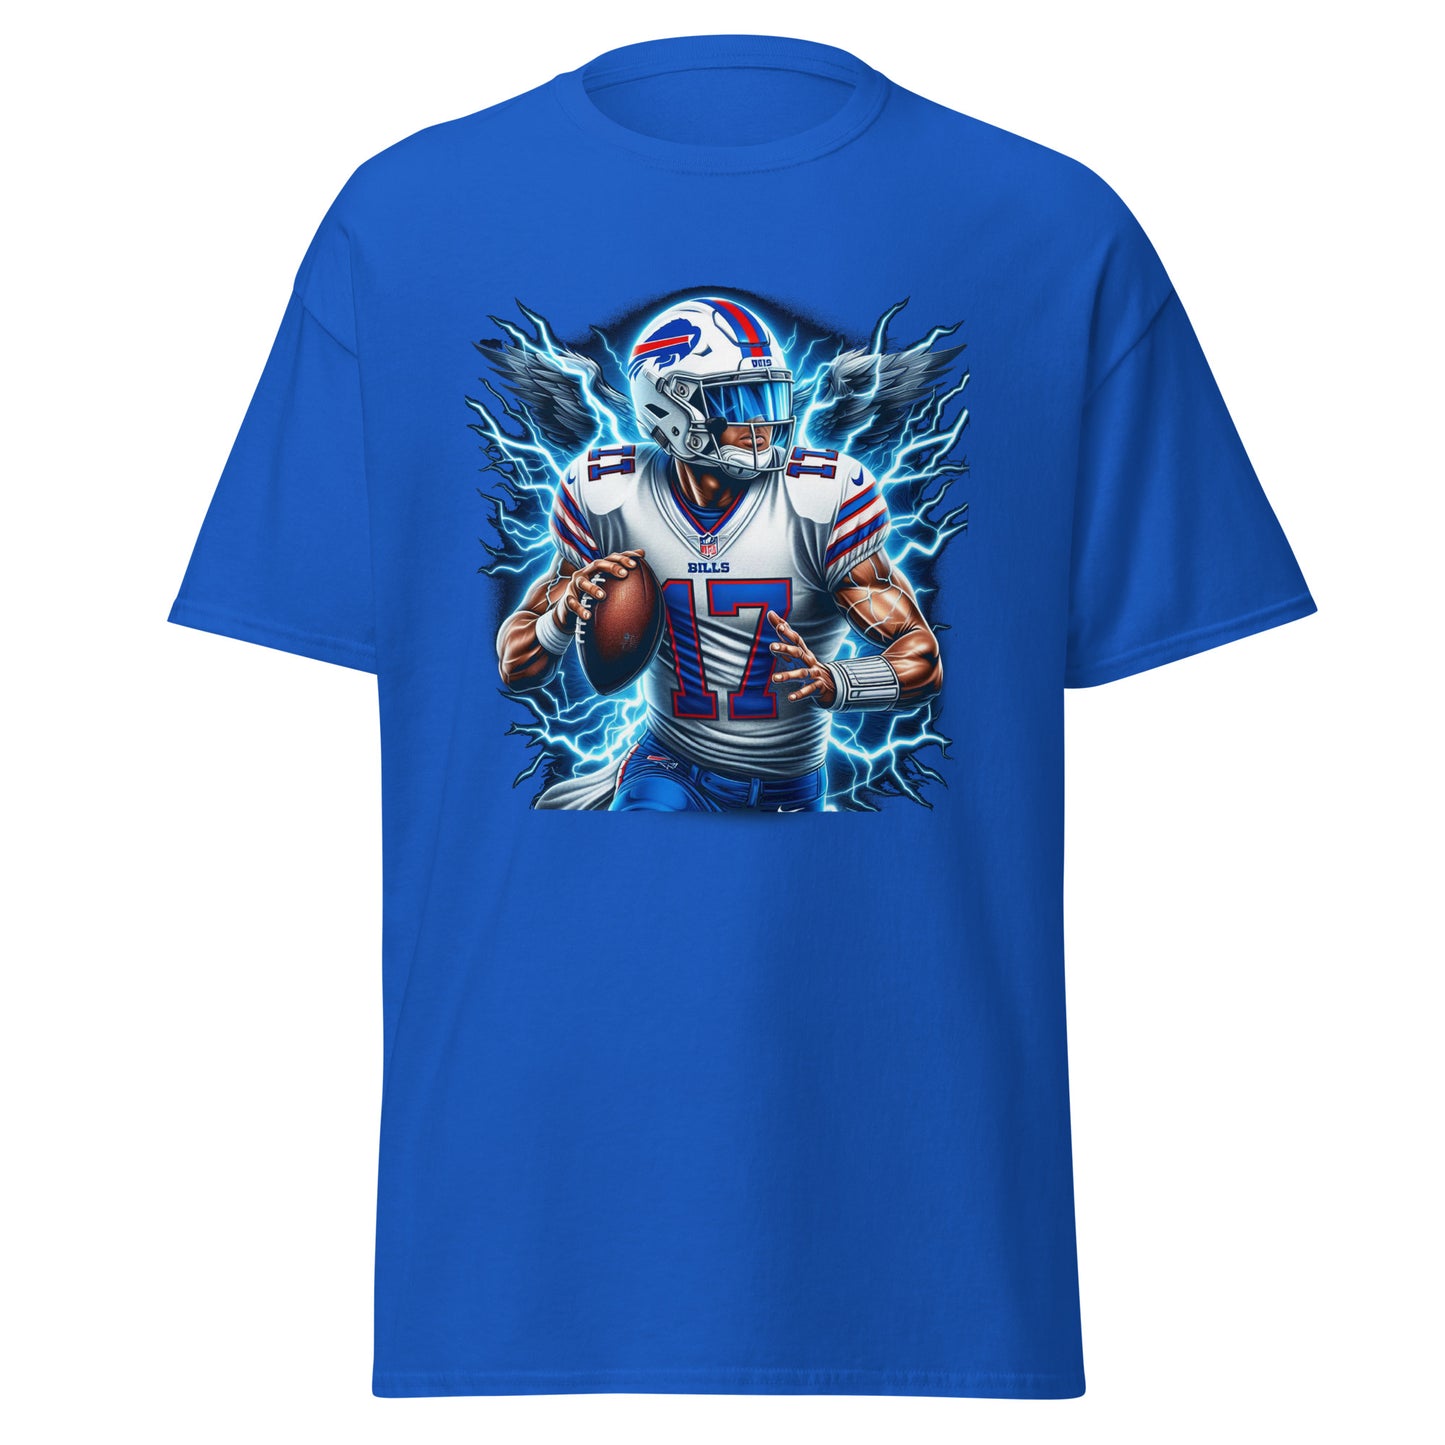 Josh Allen Elite Performance T-Shirt - Embrace the Swagger of #17